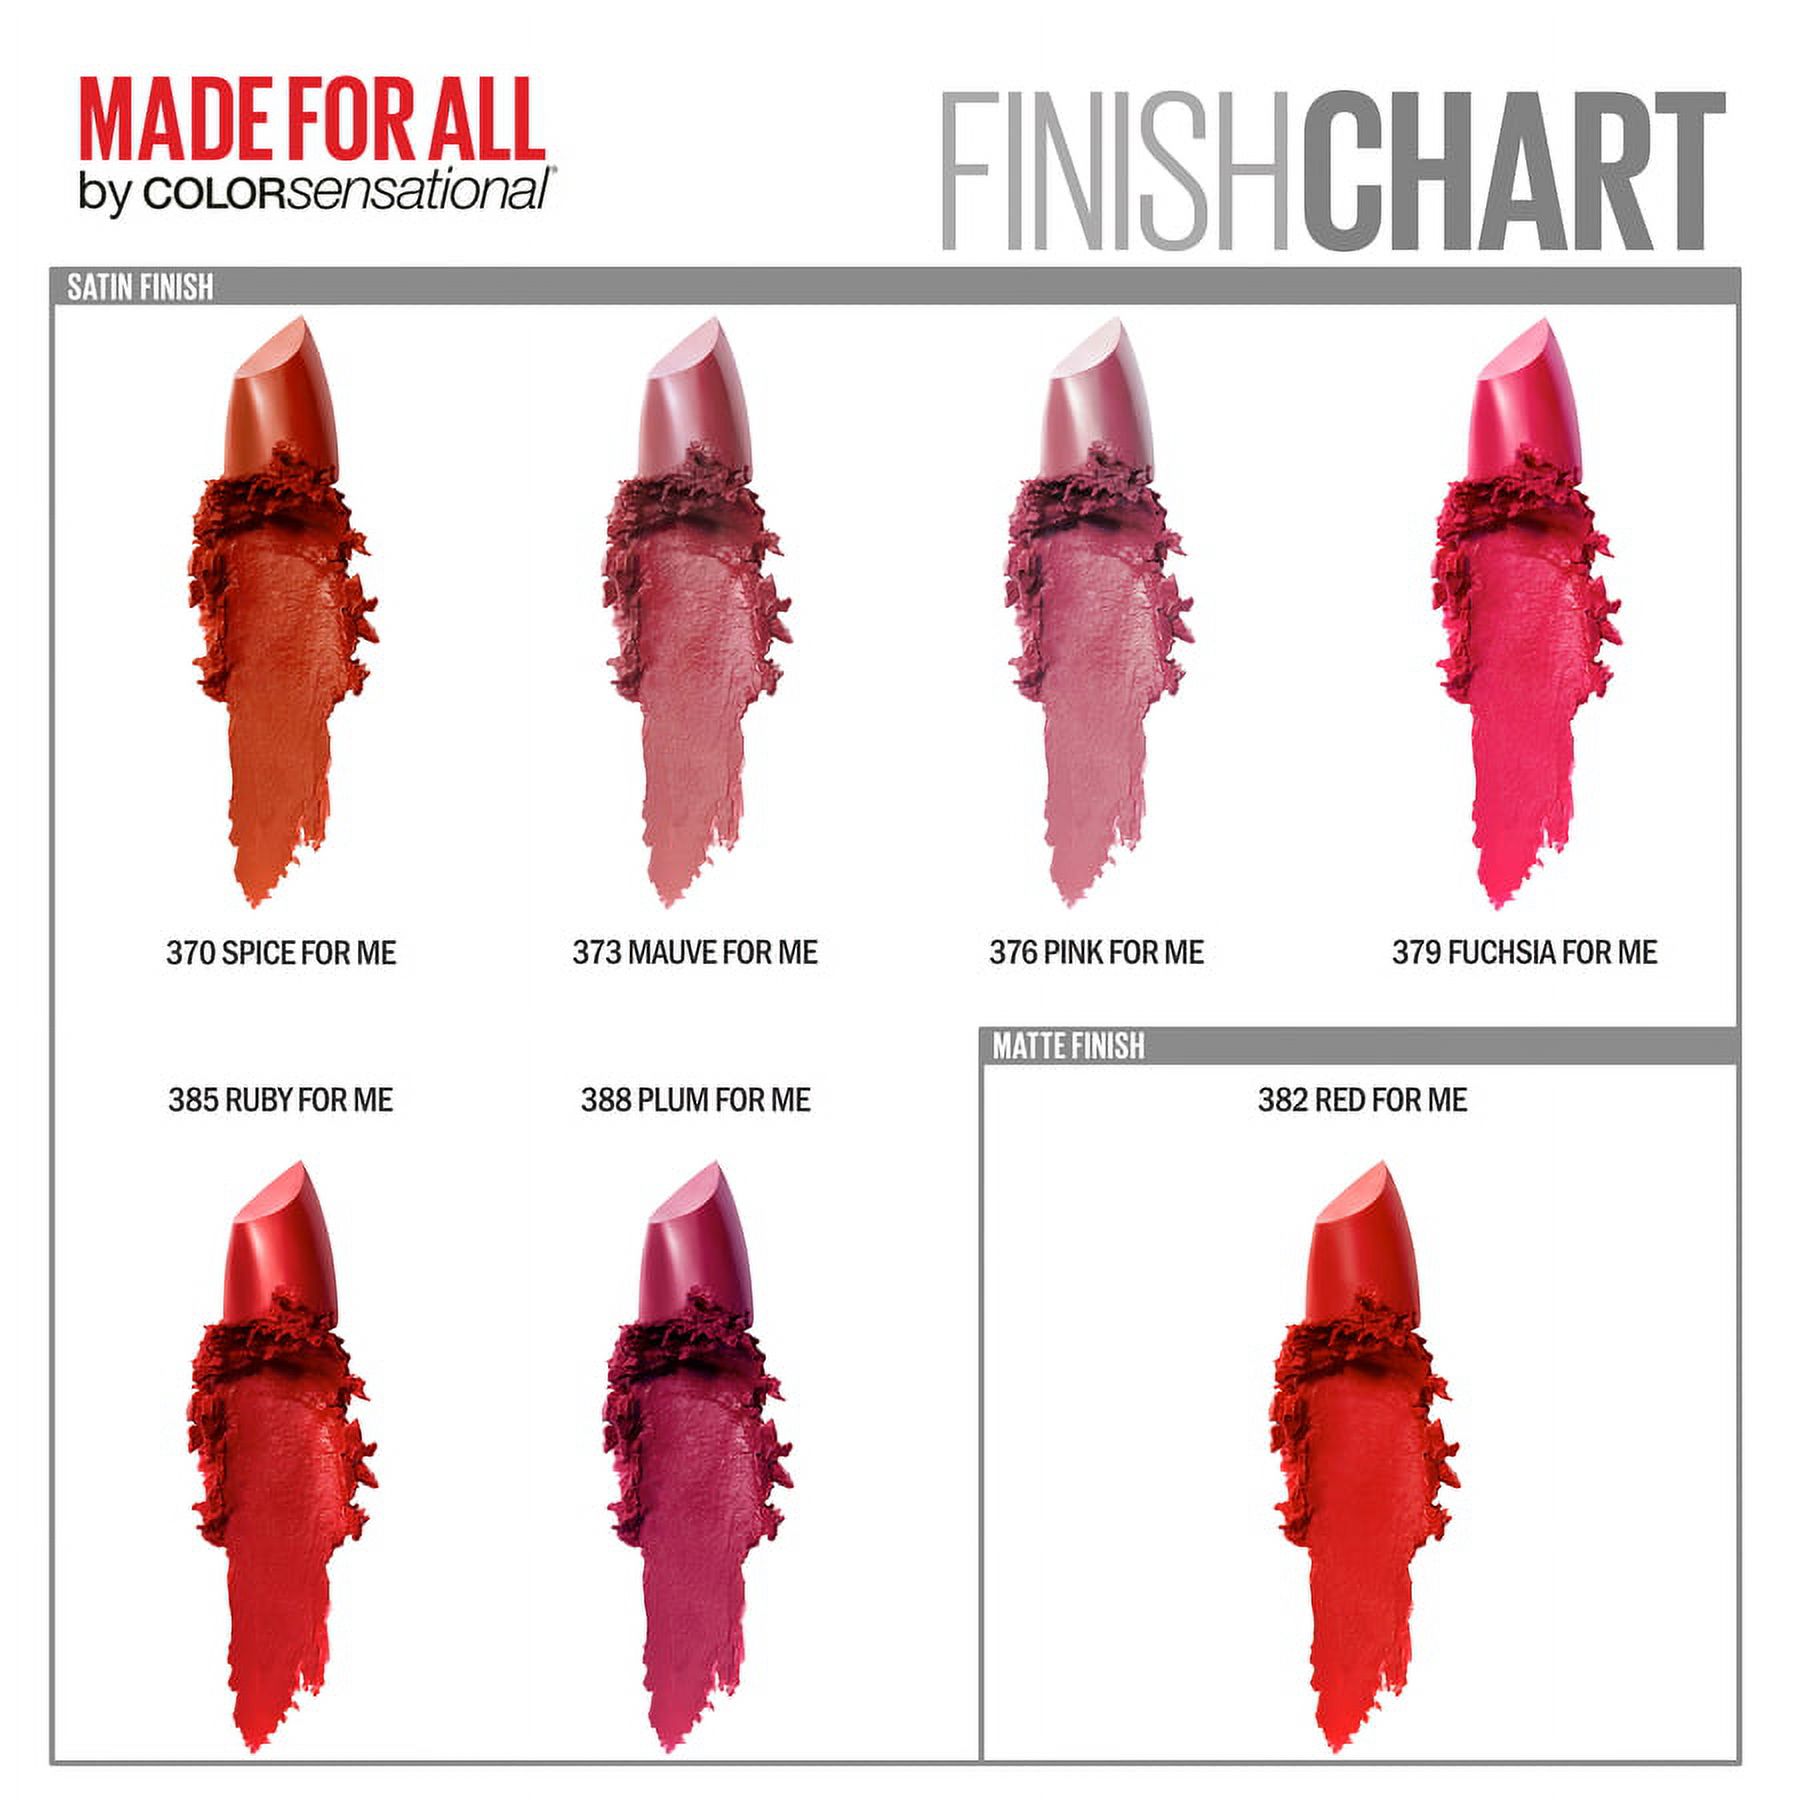 Maybelline Color Sensational Made For All Lipstick, Red For Me - image 4 of 13